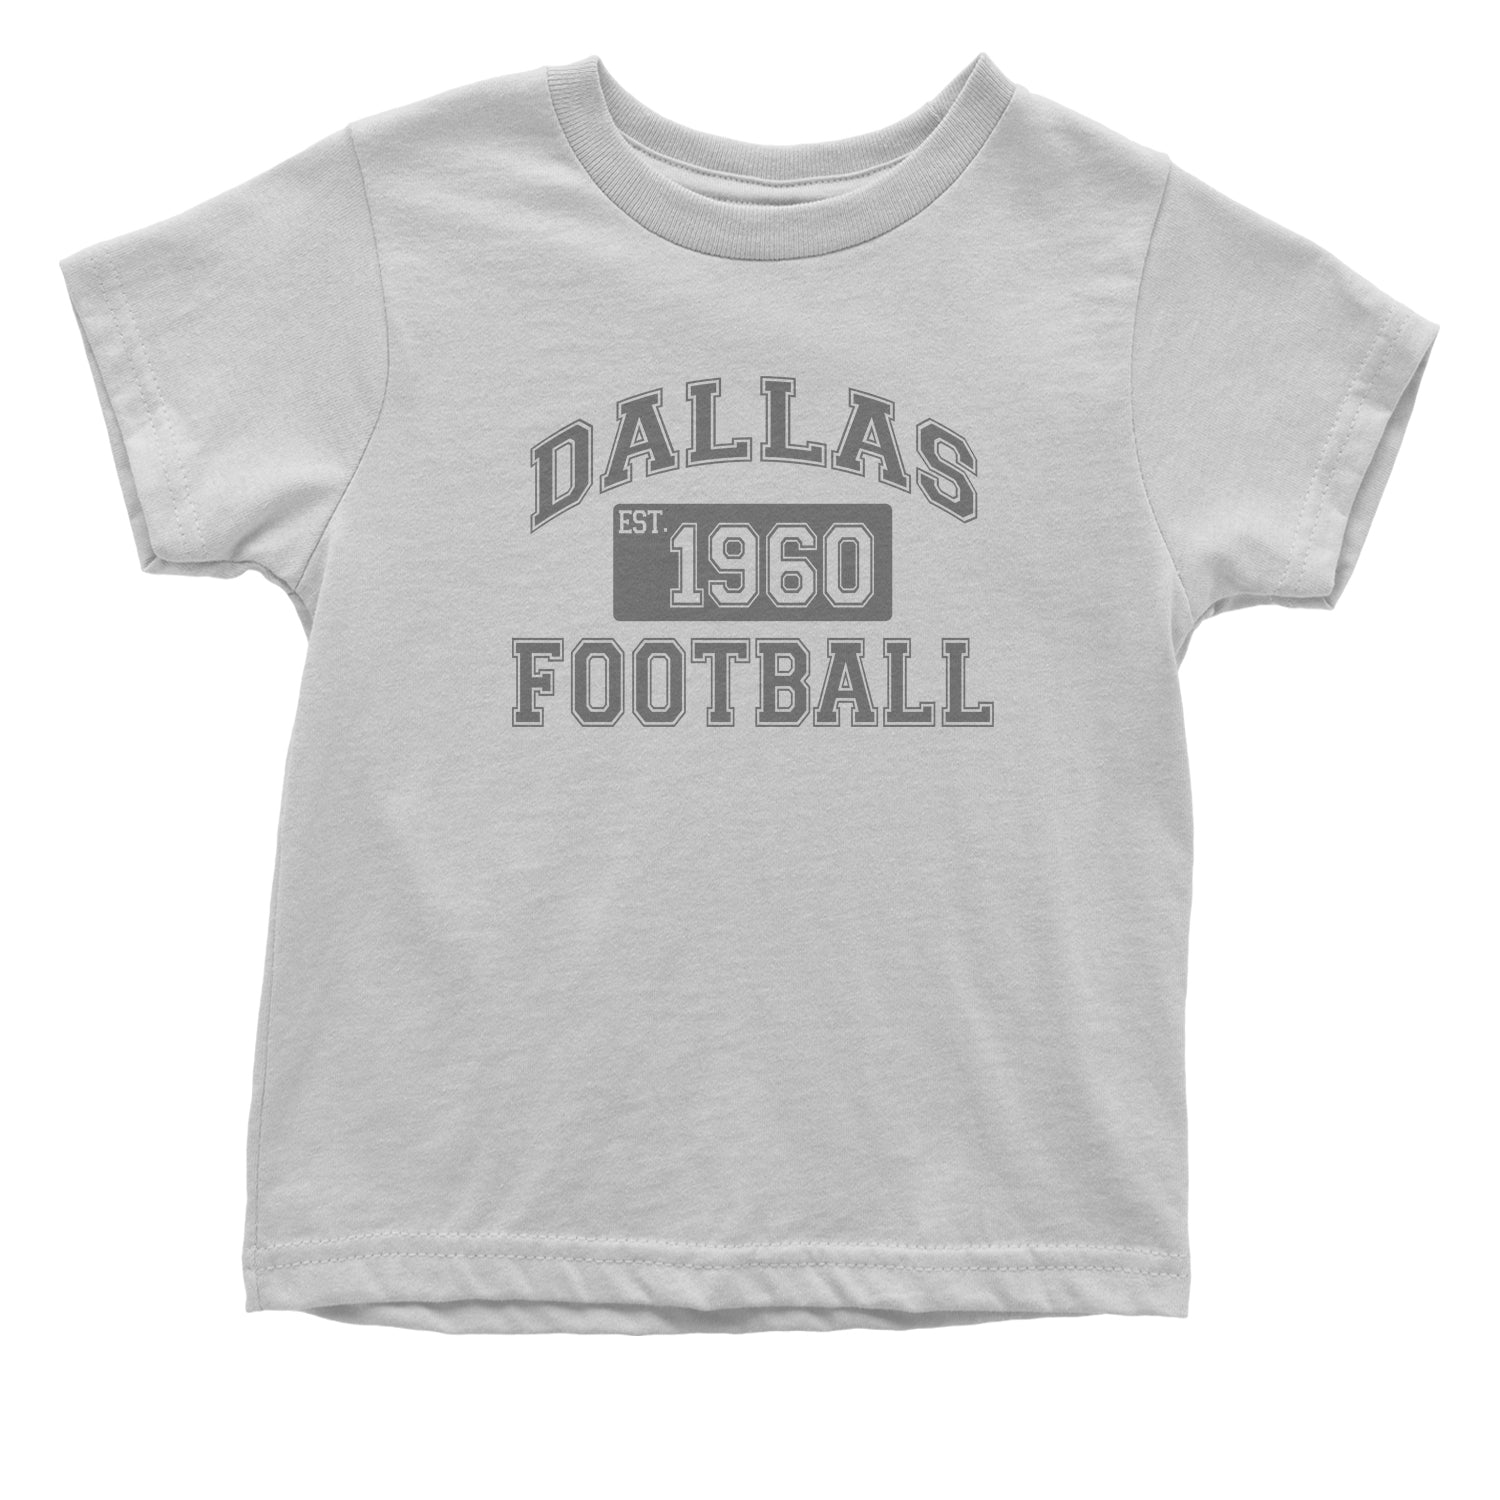 Dallas Football Established 1960 Infant One-Piece Romper Bodysuit and Toddler T-shirt boys, dem by Expression Tees